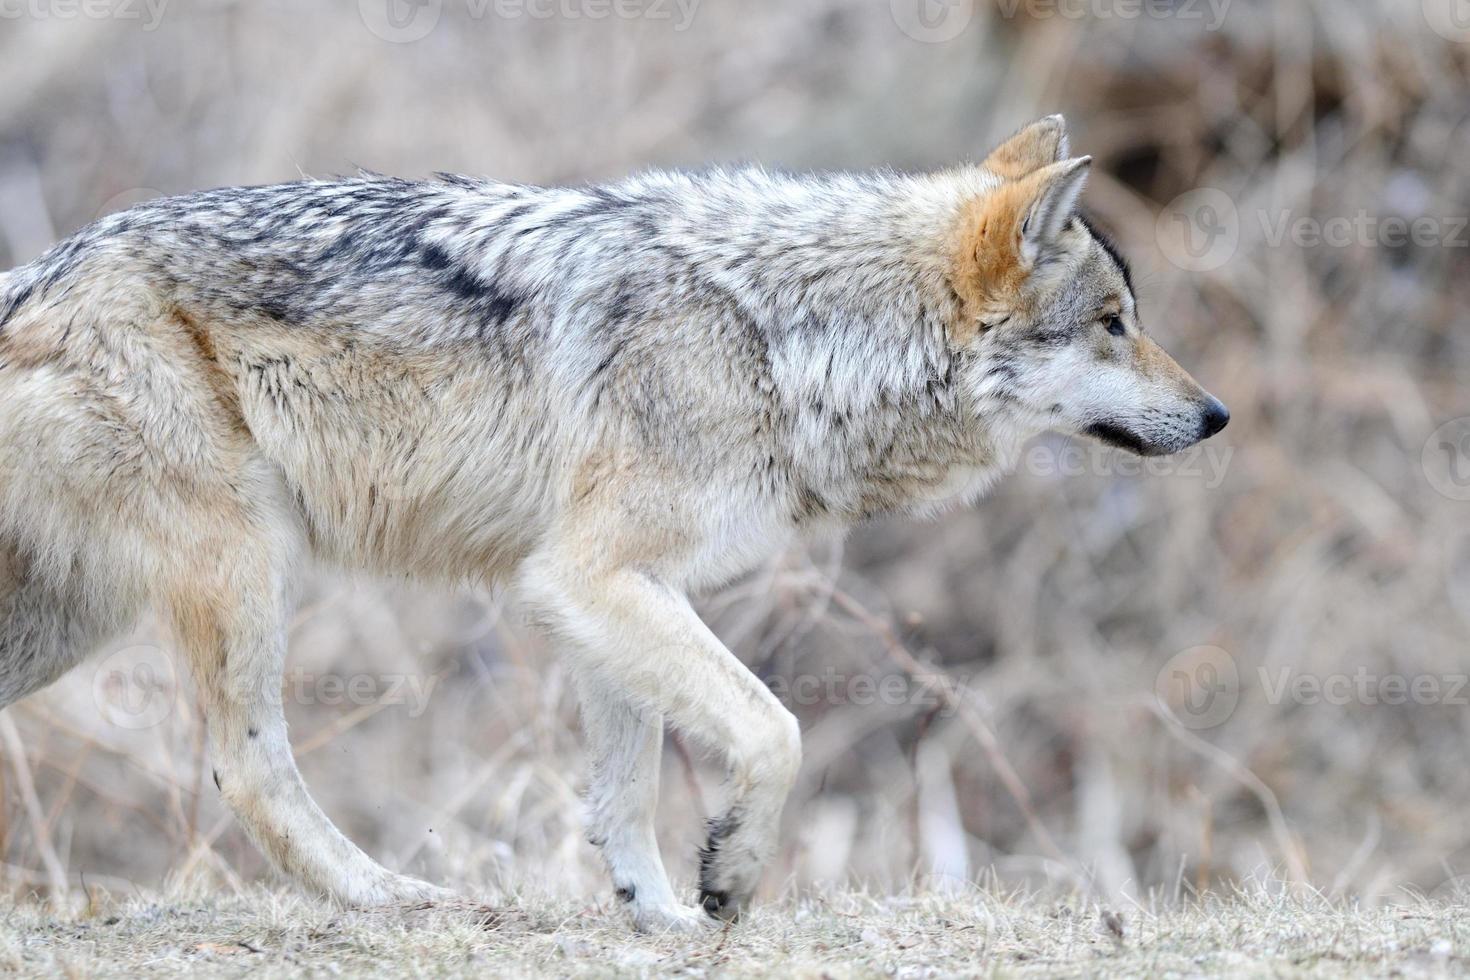 Mexican gray wolf photo